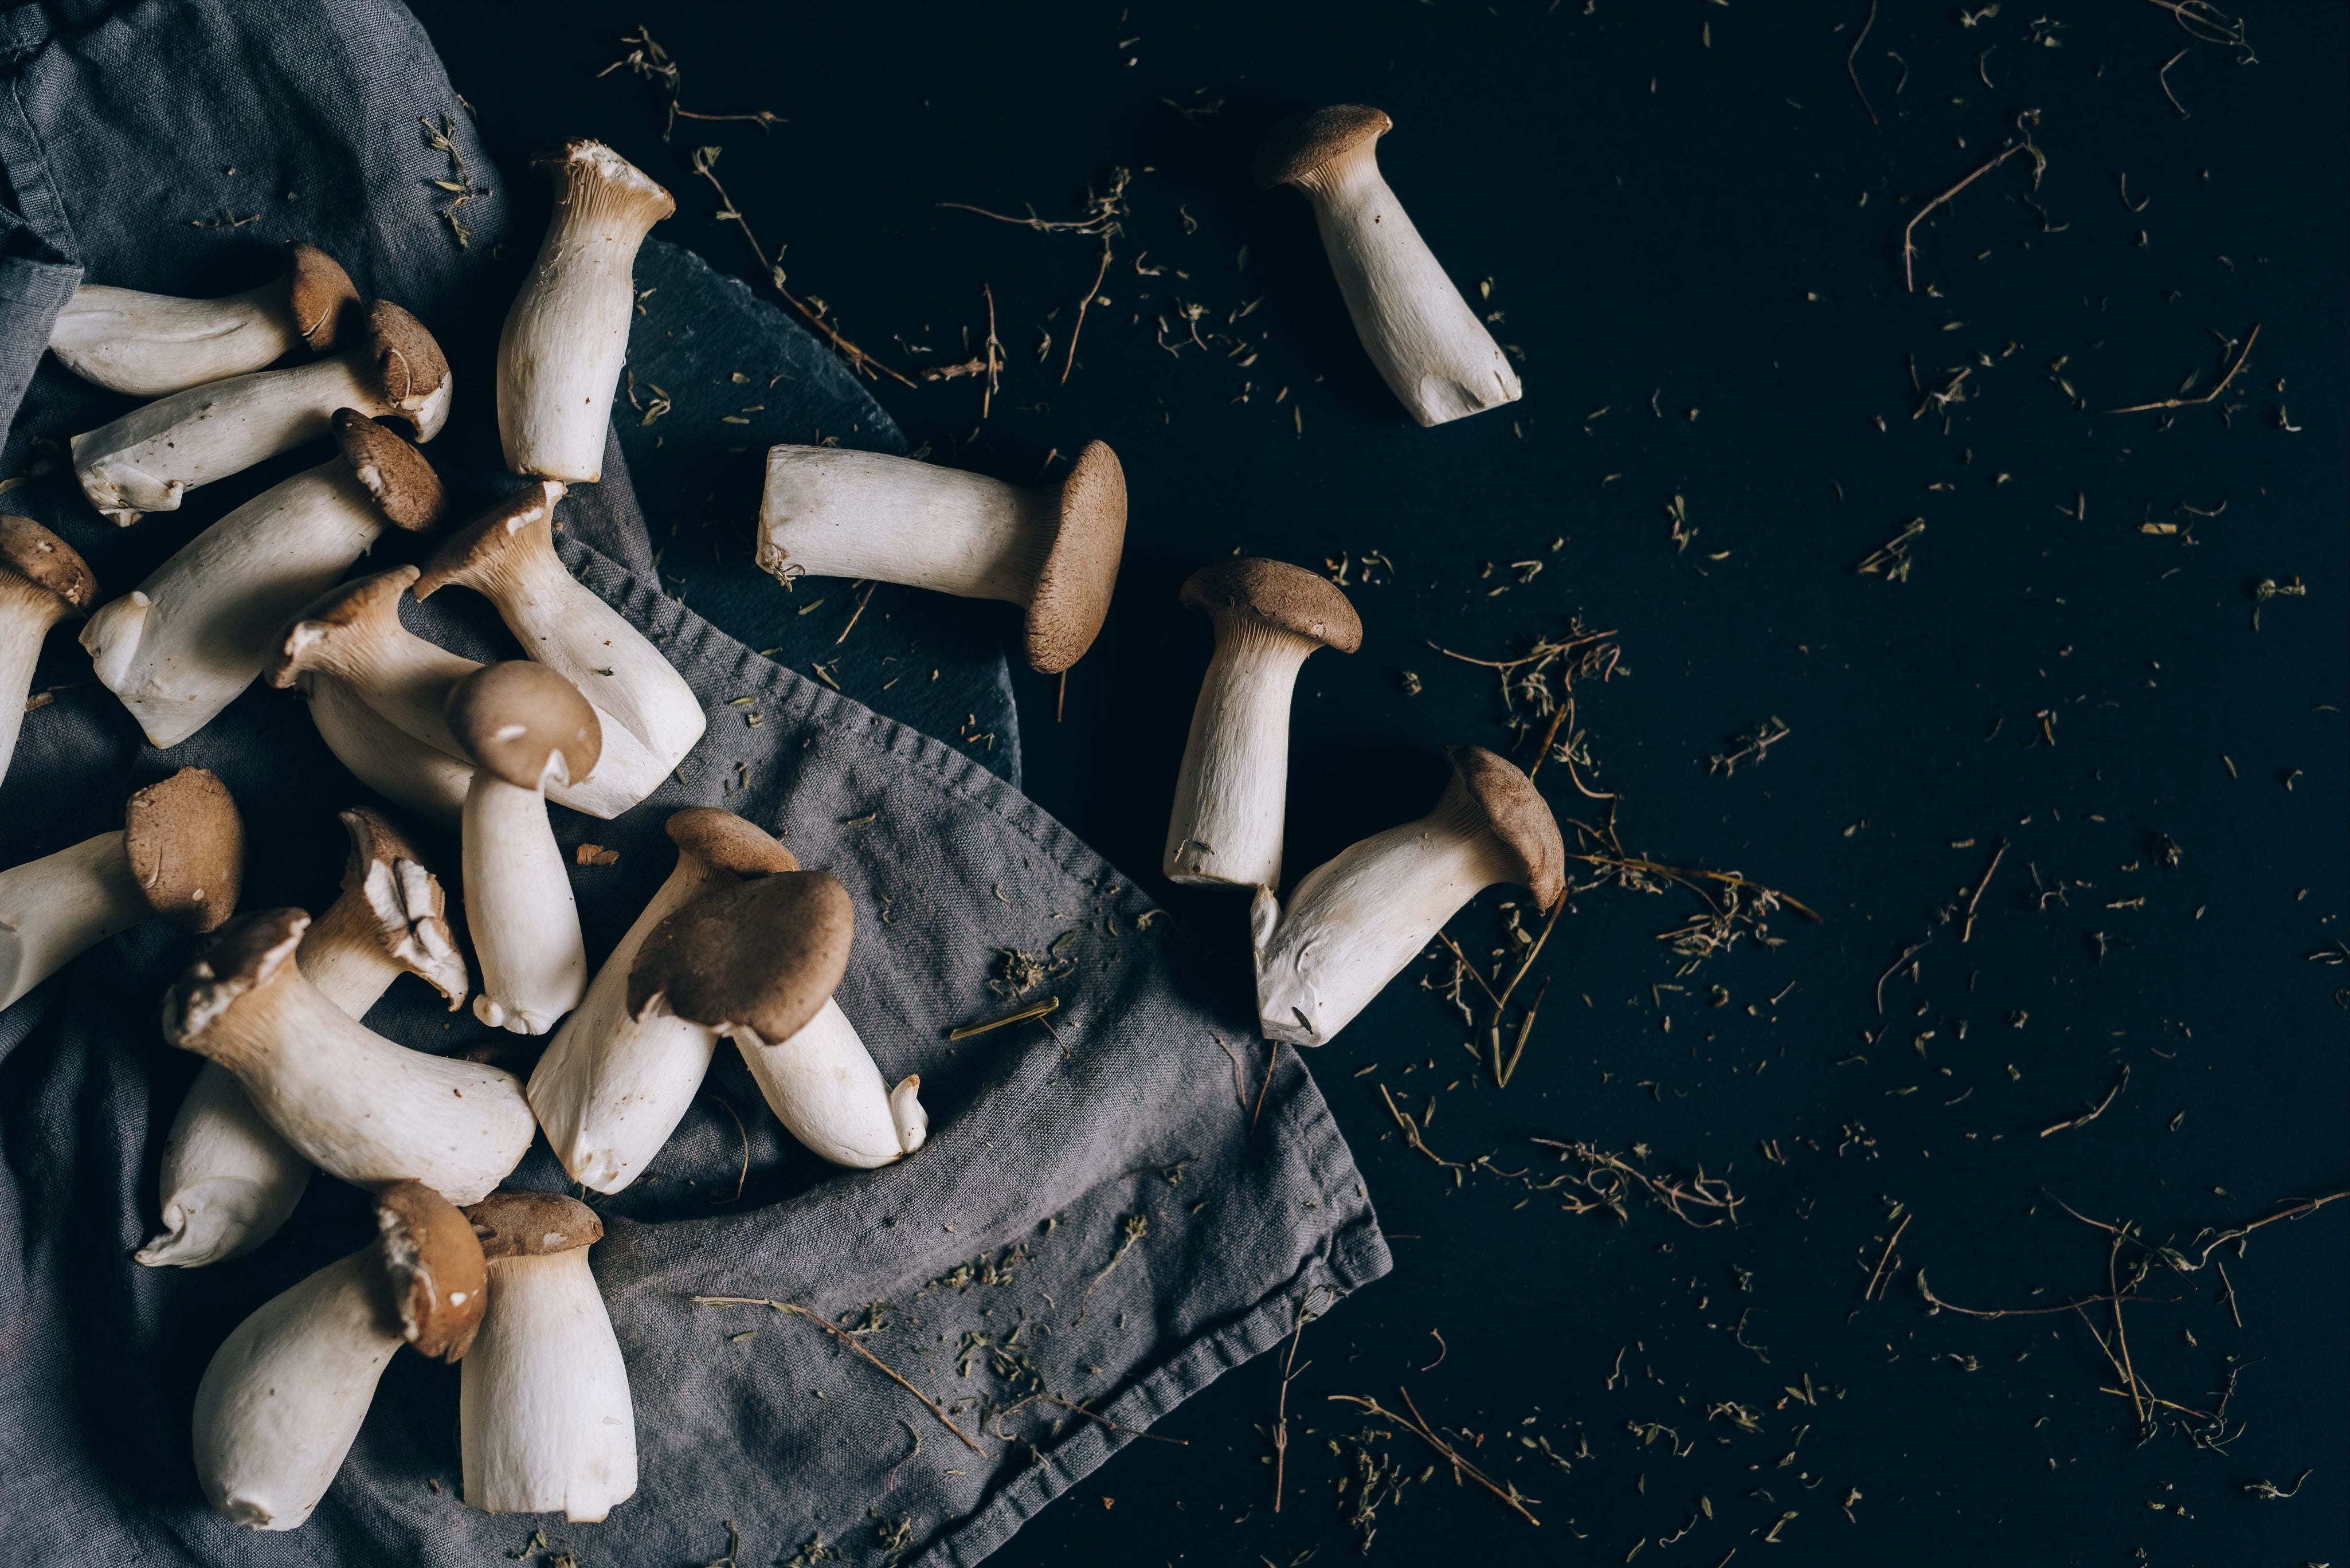 Mushrooms For Sports: Mushroom Benefits For Pre-workout, Performance and Recovery